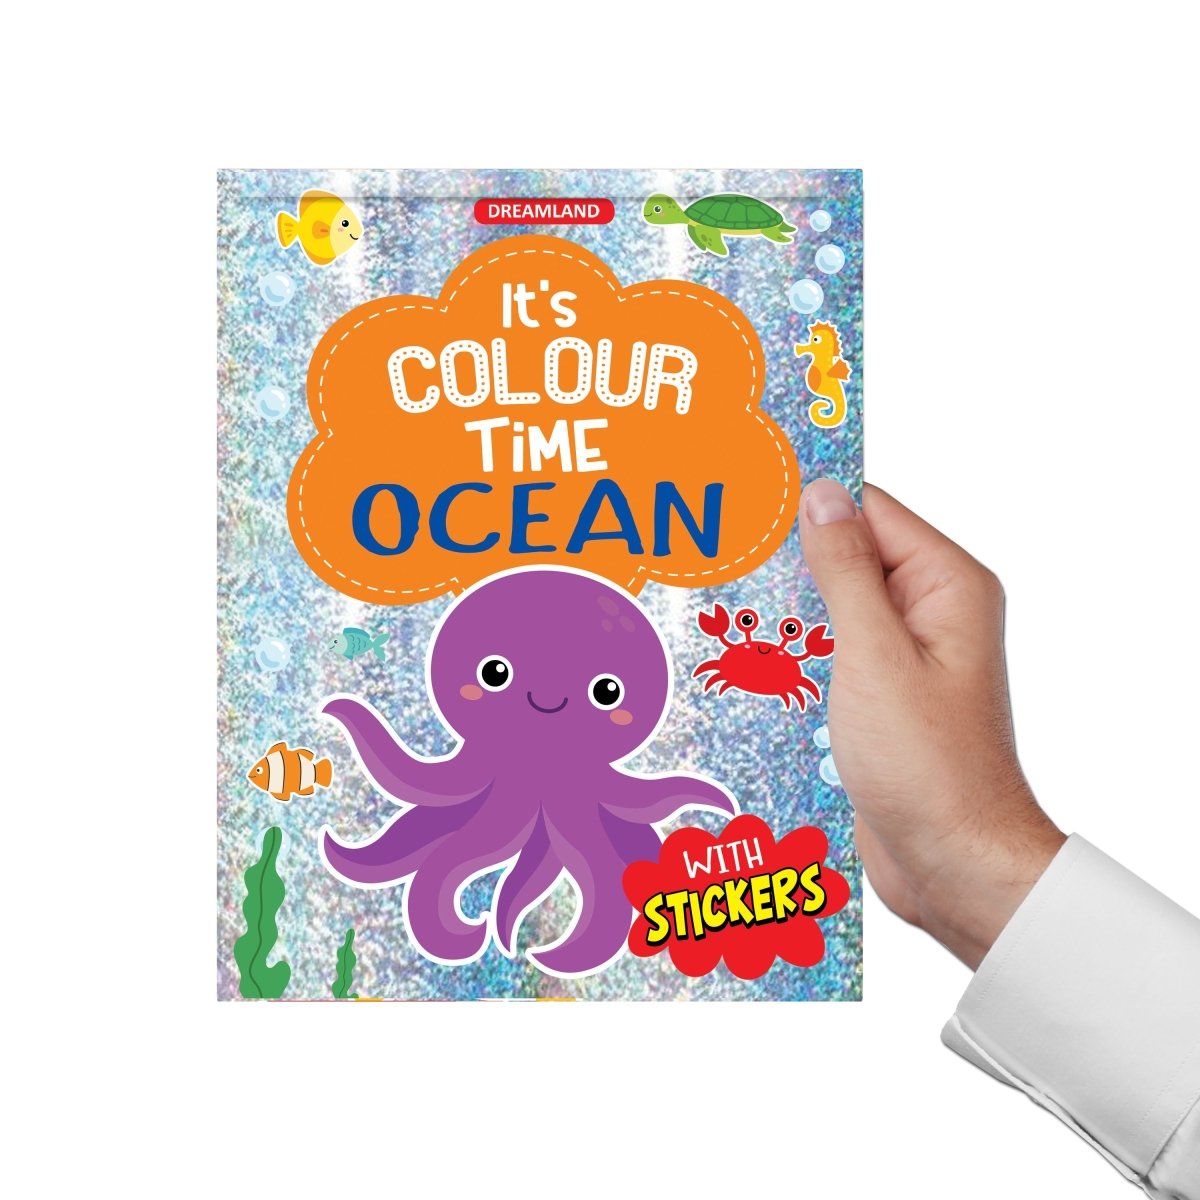 Dreamland Publications It's Colour Time Books Pack- A Pack of 4 Books - 9789395588898